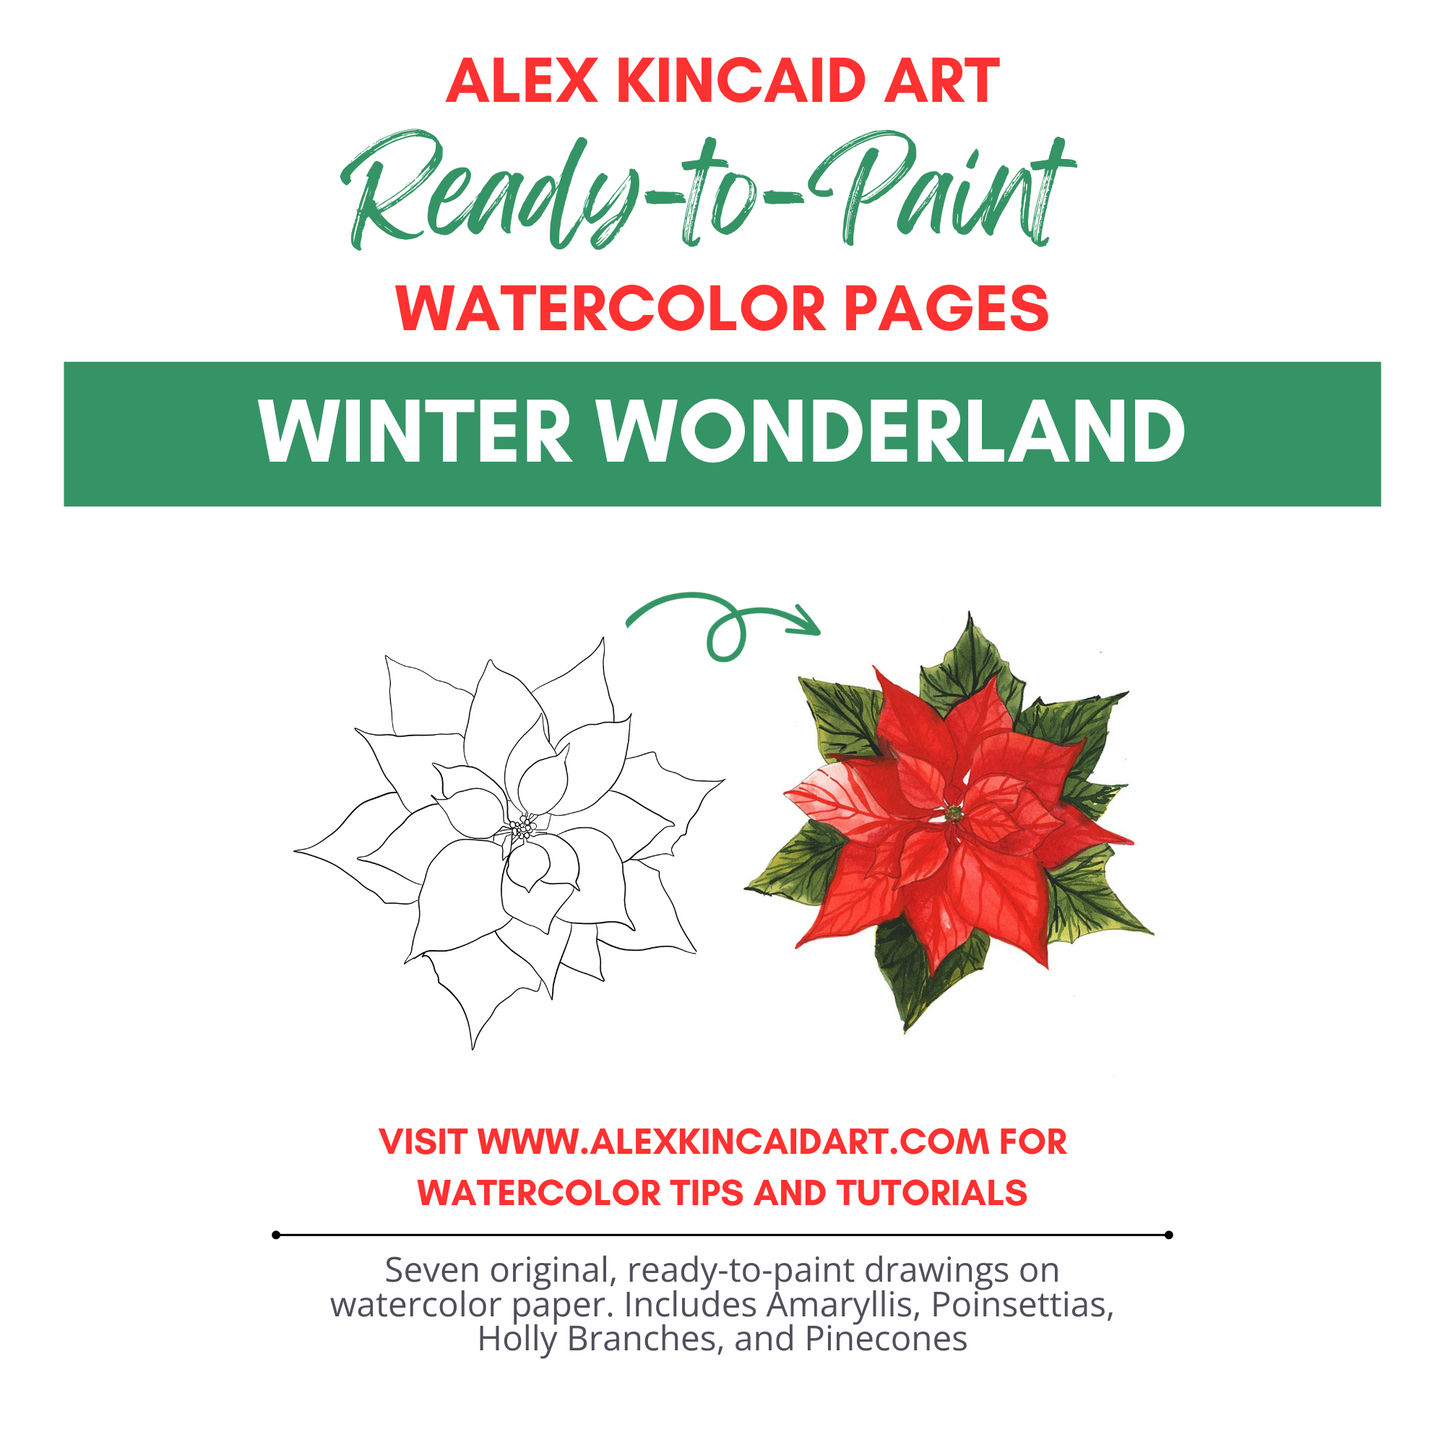 Ready-to-Paint Watercolor Pages: Winter Wonderland